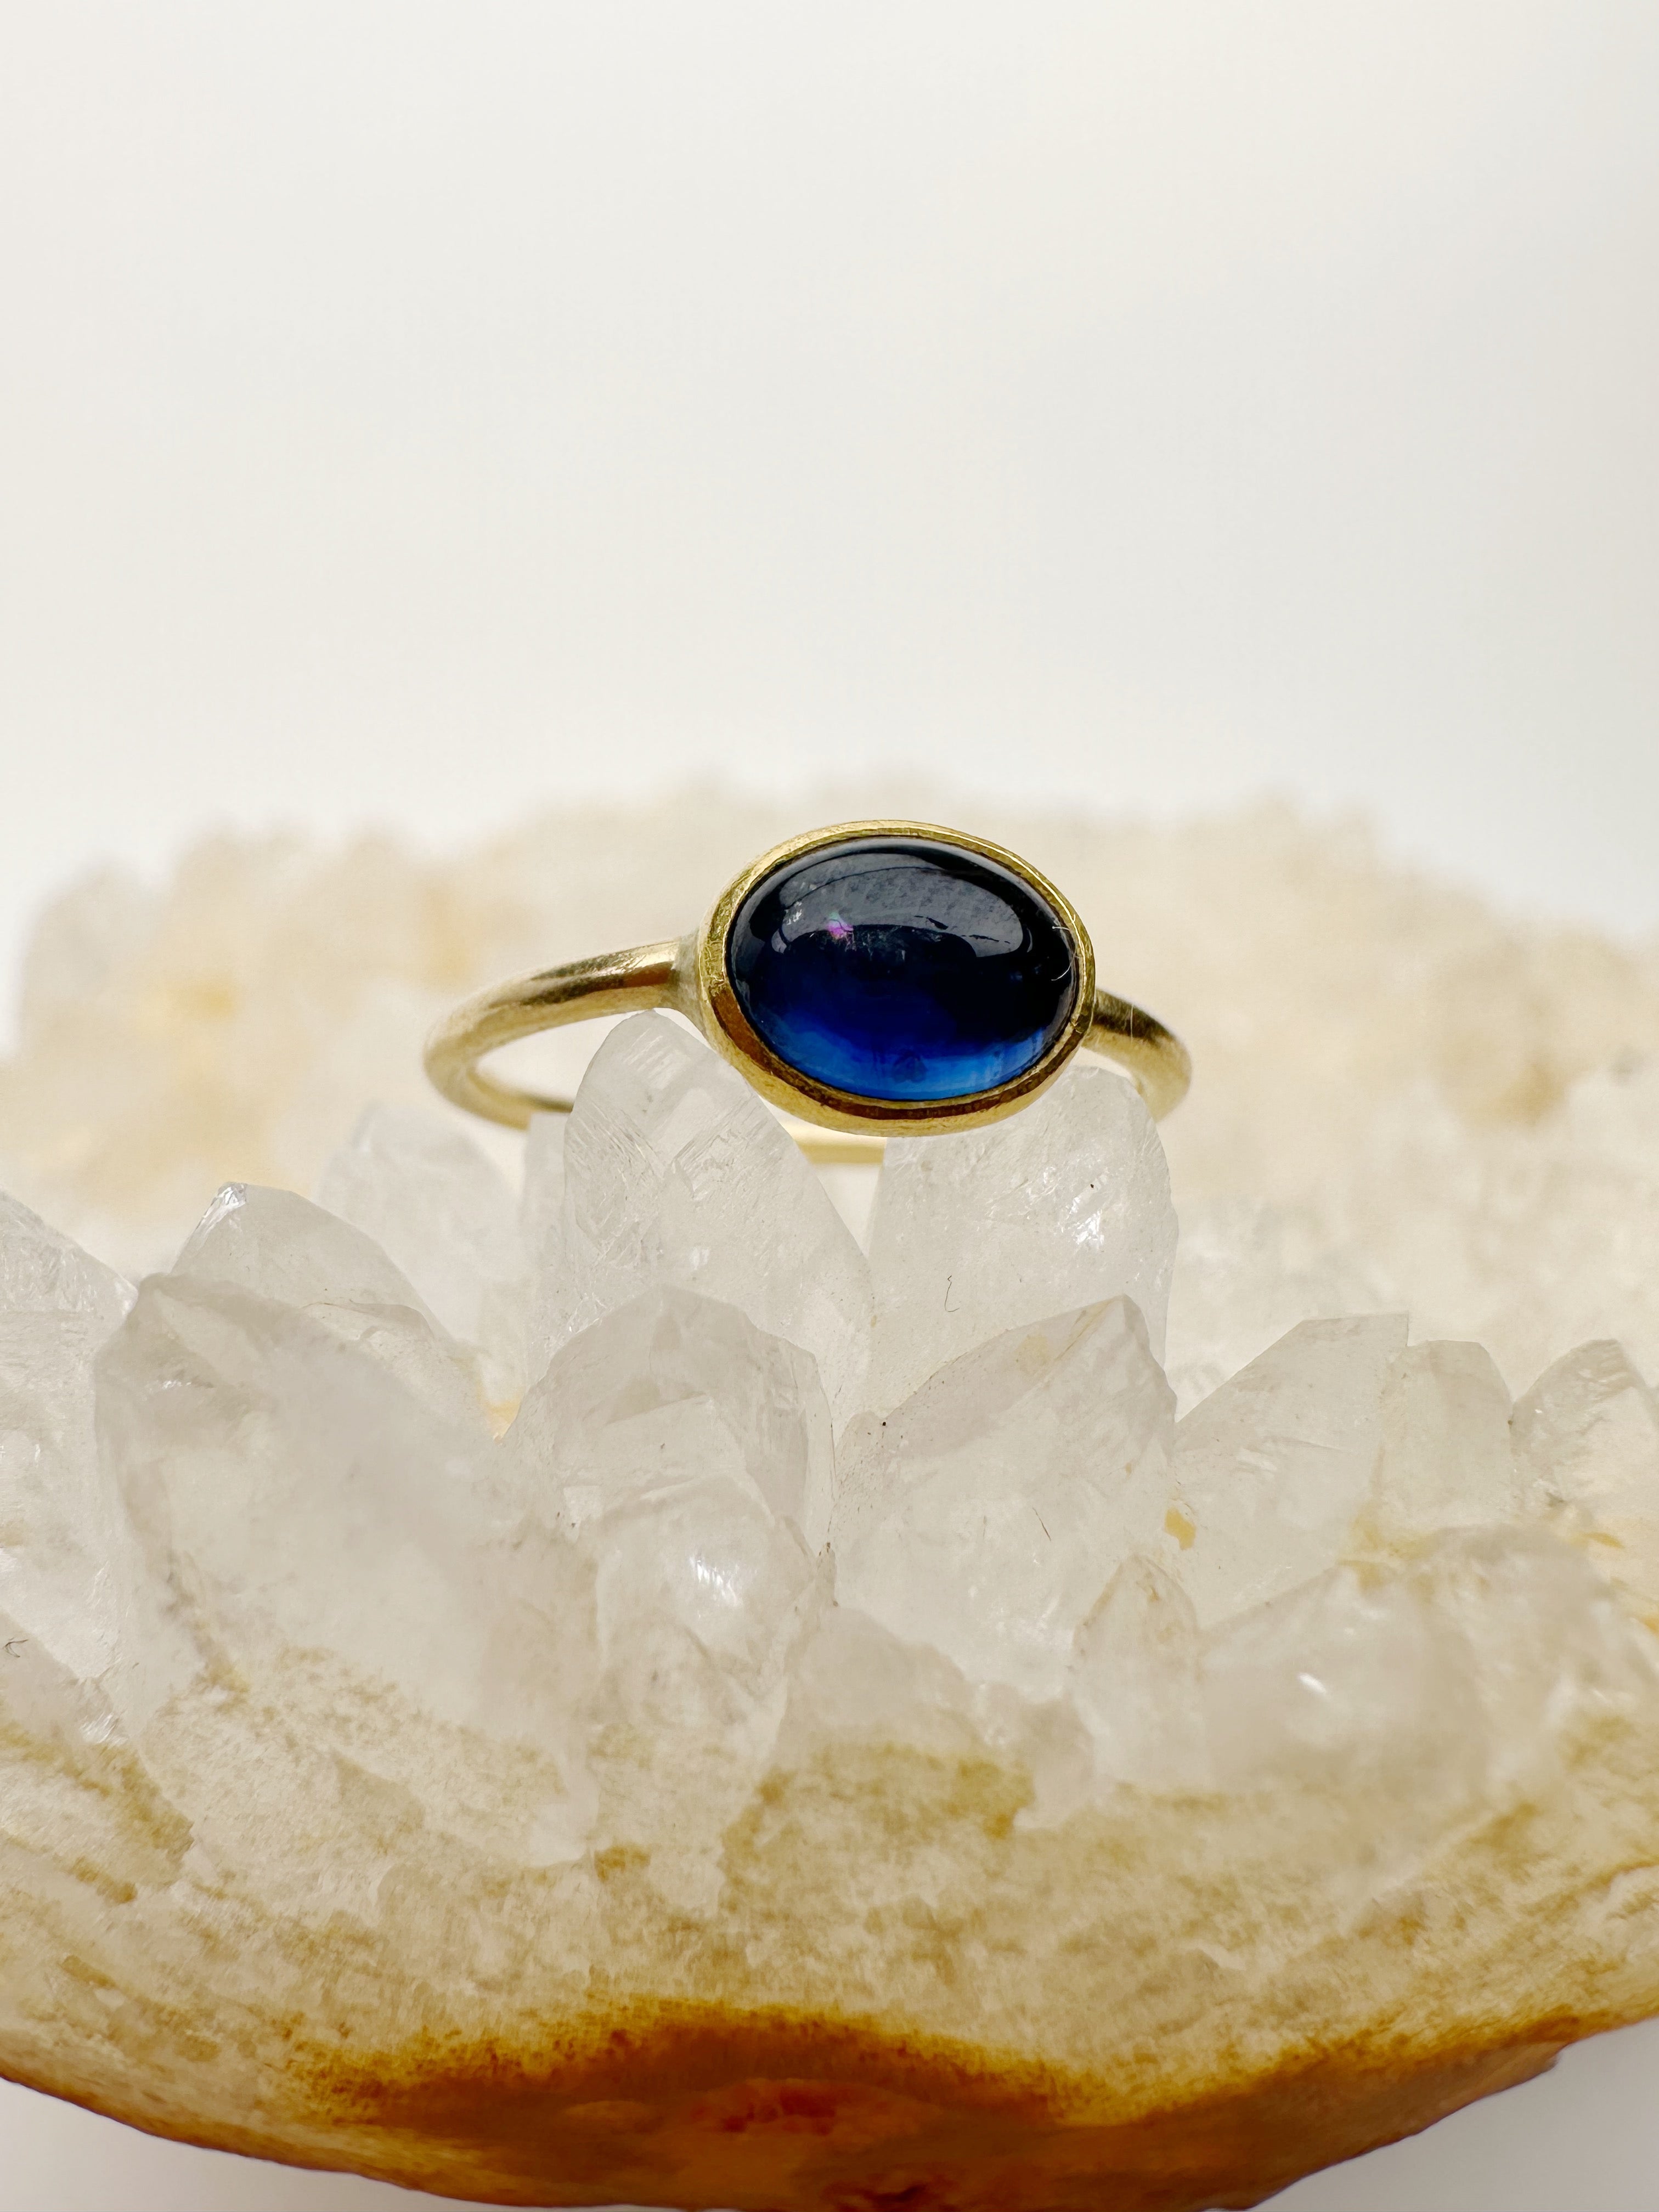 French Art Deco 7.90 Ct Cabochon Sapphire Engagement Ring - Antique Jewelry  | Vintage Rings | Faberge EggsAntique Jewelry | Vintage Rings | Faberge Eggs